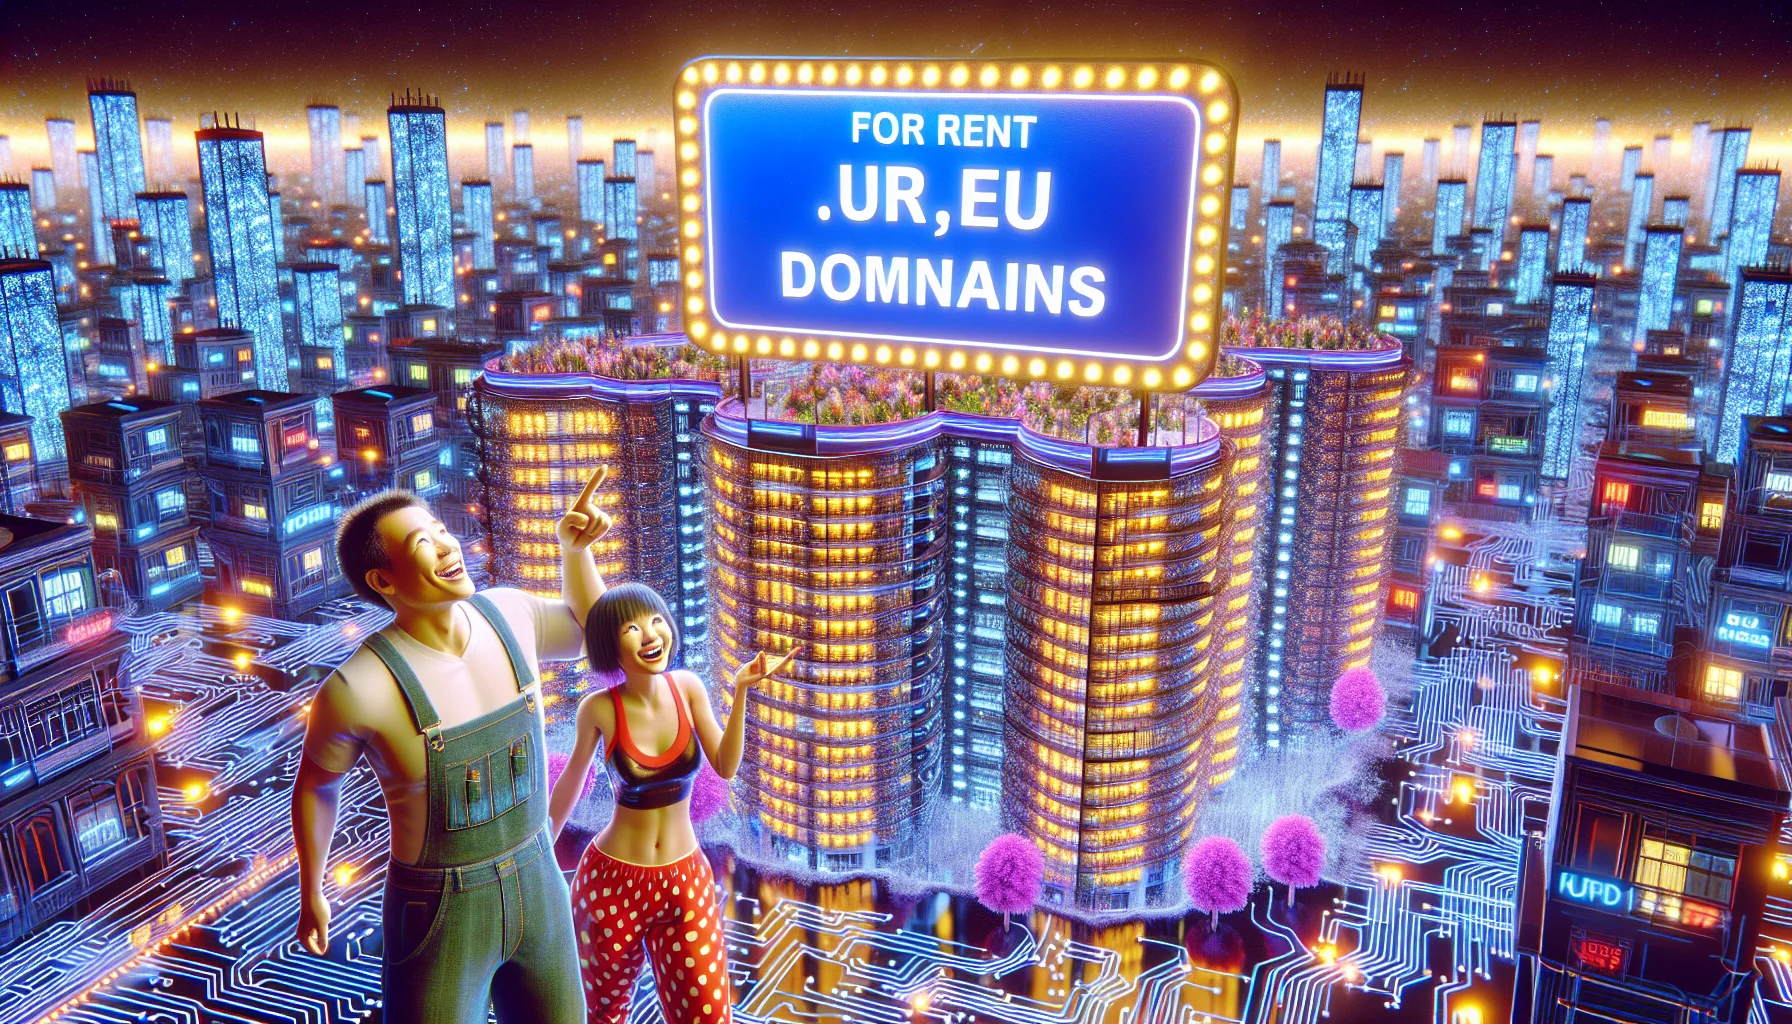 Create a humorous and enticing scene about .eu domains provided by a web hosting company. The scene could depict a physical representation of the internet as a vast, bustling city made of shimmering circuitry and glowing data streams. The main feature is a large, colorful billboard showcasing the .eu domains, portrayed as stylish, futuristic apartments available for rent. The 'For Rent' sign on the billboard is replaced by 'Web Hosting Available' and the skyline around is filled with virtual skyscrapers, symbolizing other domains. A few comically exaggerated, joyful characters (an Asian woman and a Black man) are seen excitedly pointing at the billboard, ready to 'move in' to their new .eu domain.